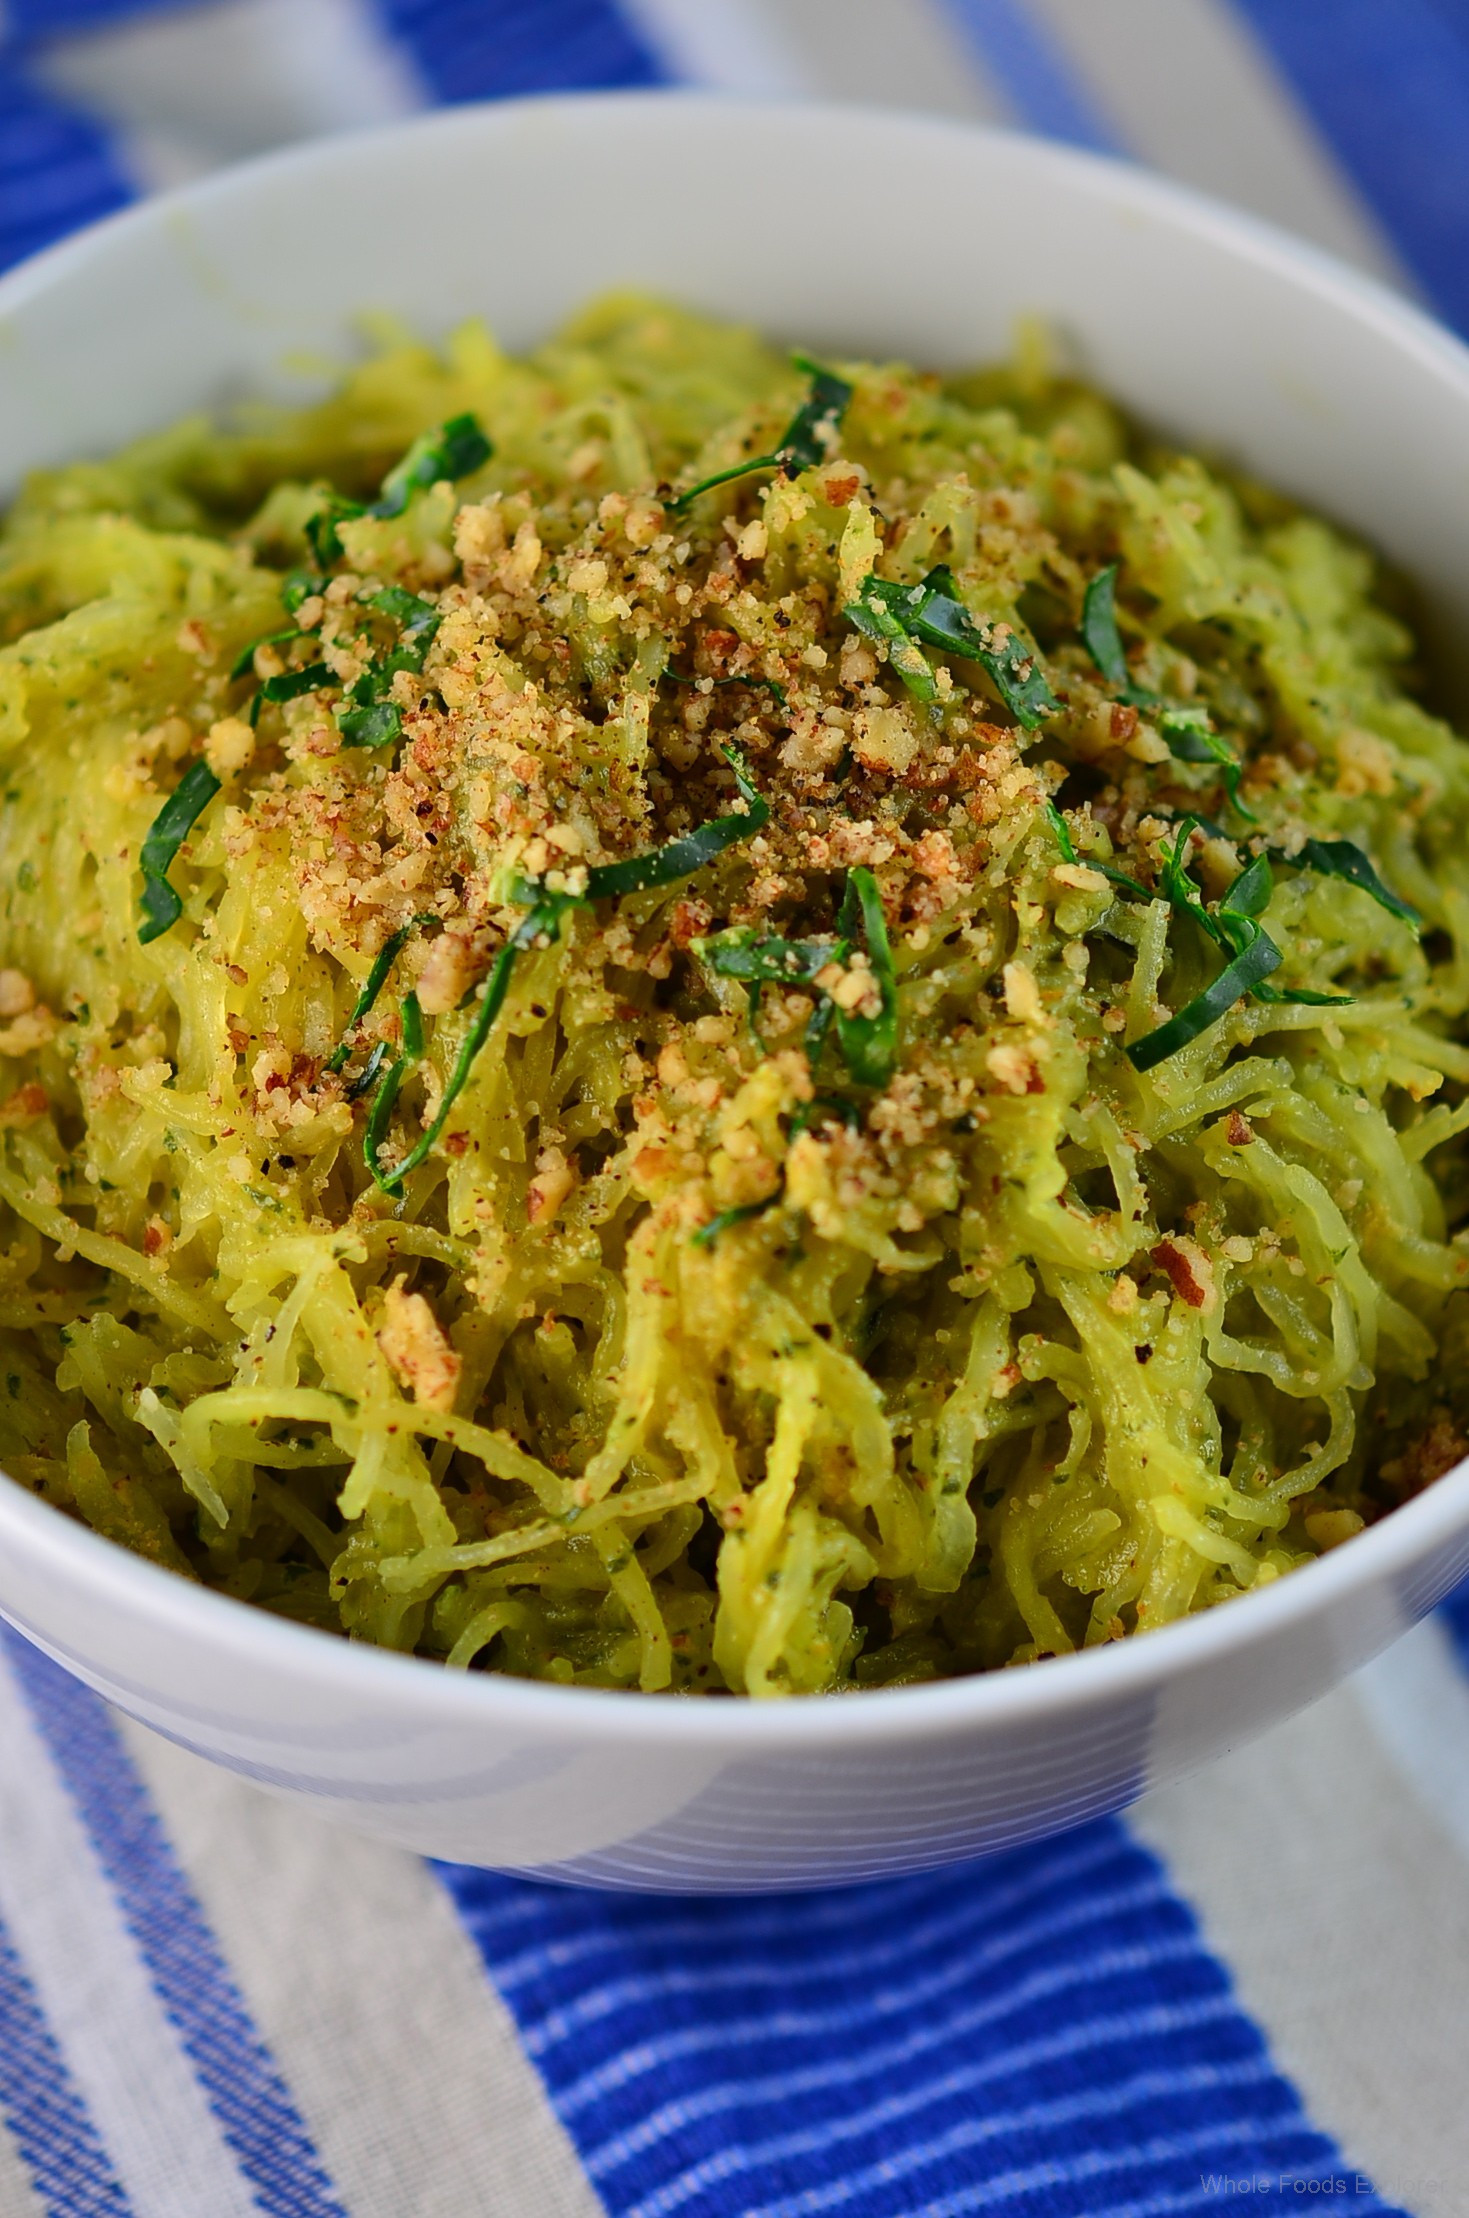 Microwave Spaghetti Squash Whole
 How to Cook Spaghetti Squash Whole Foods Explorer